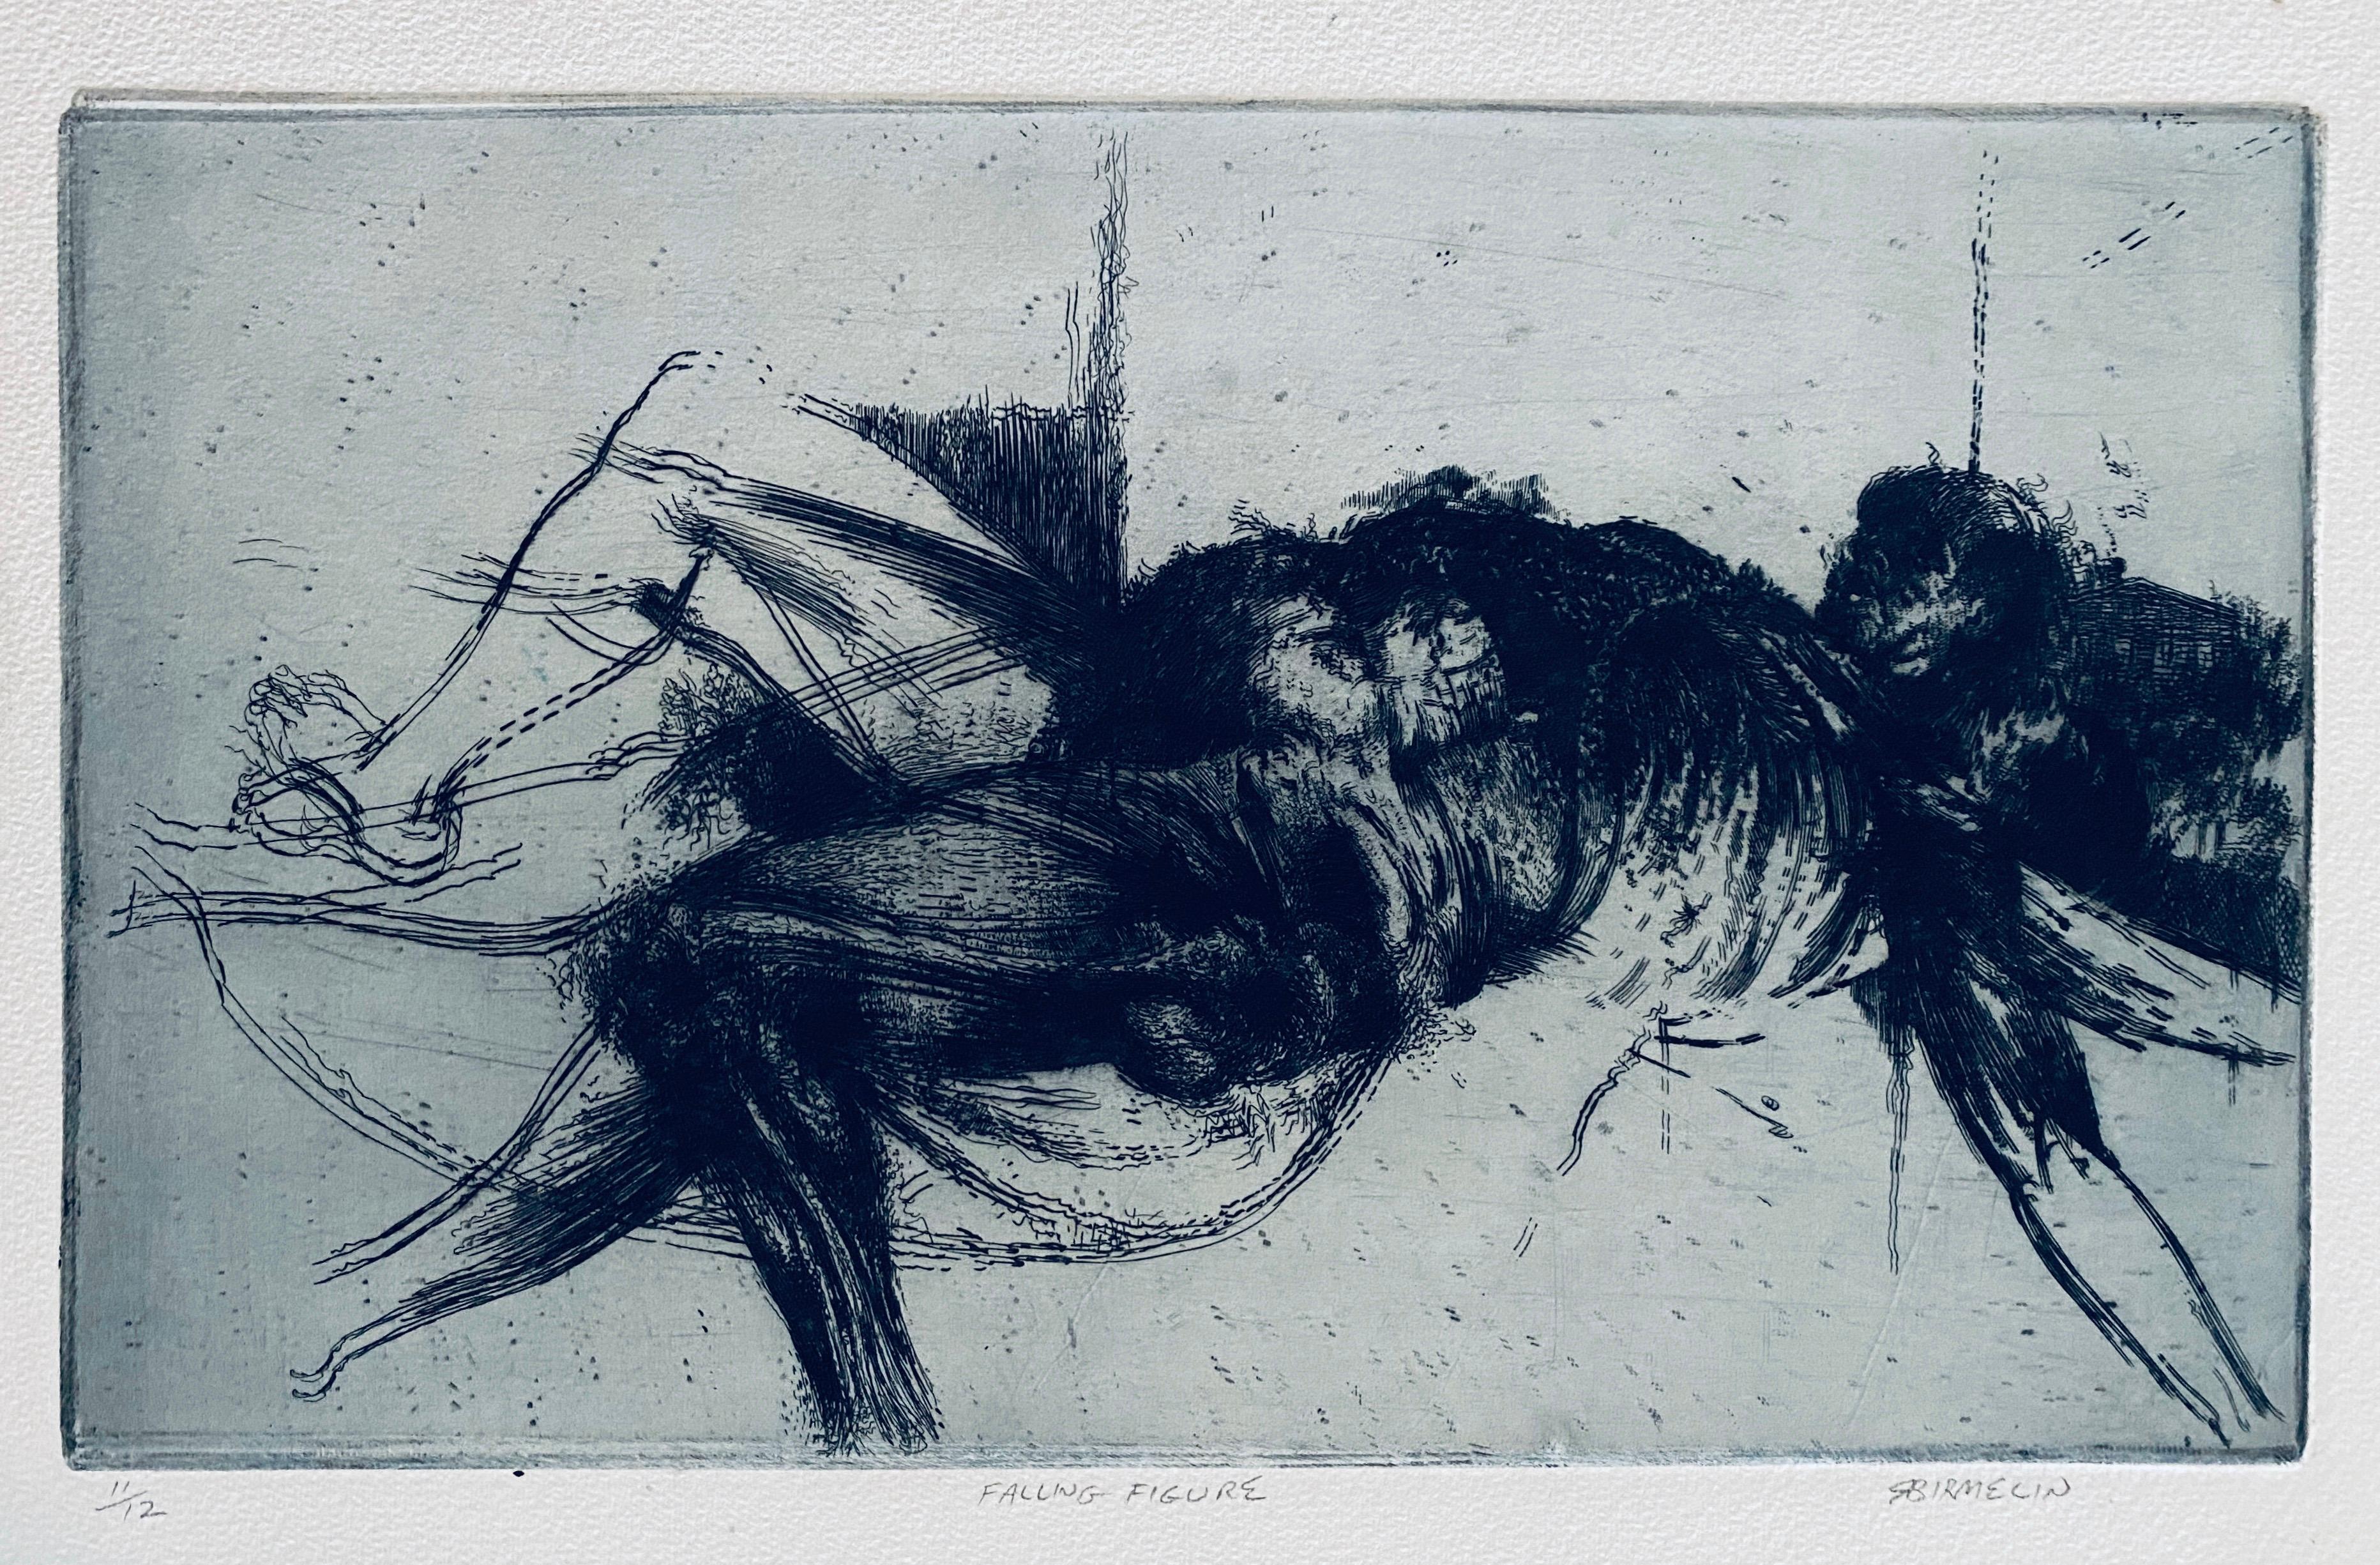 Falling Figure, American Modernist Abstract Etching - Print by Robert A. Birmelin